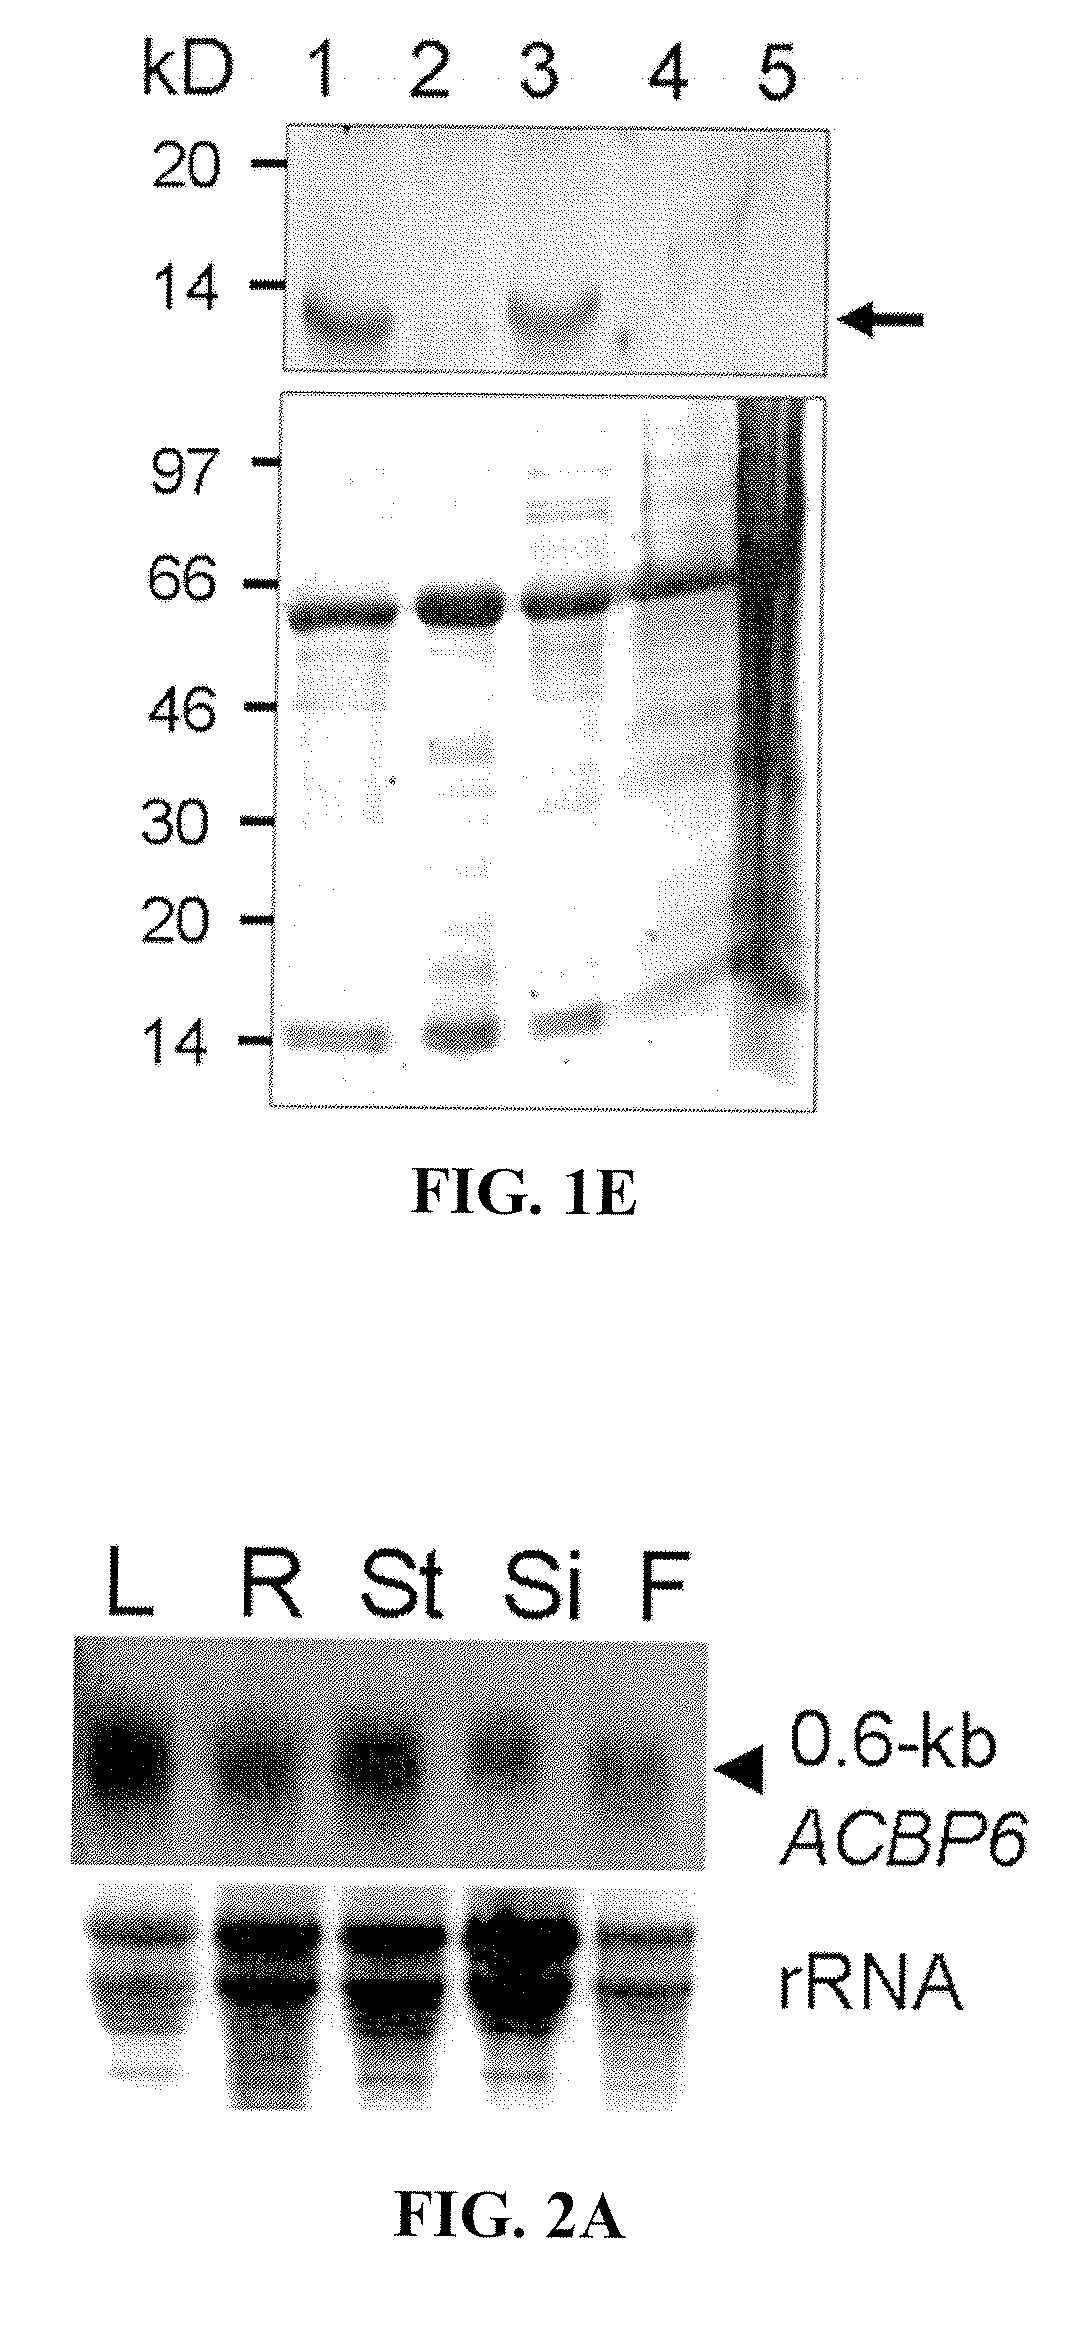 Methods using acyl-CoA binding proteins to enhance low-temperature tolerance in genetically modified plants